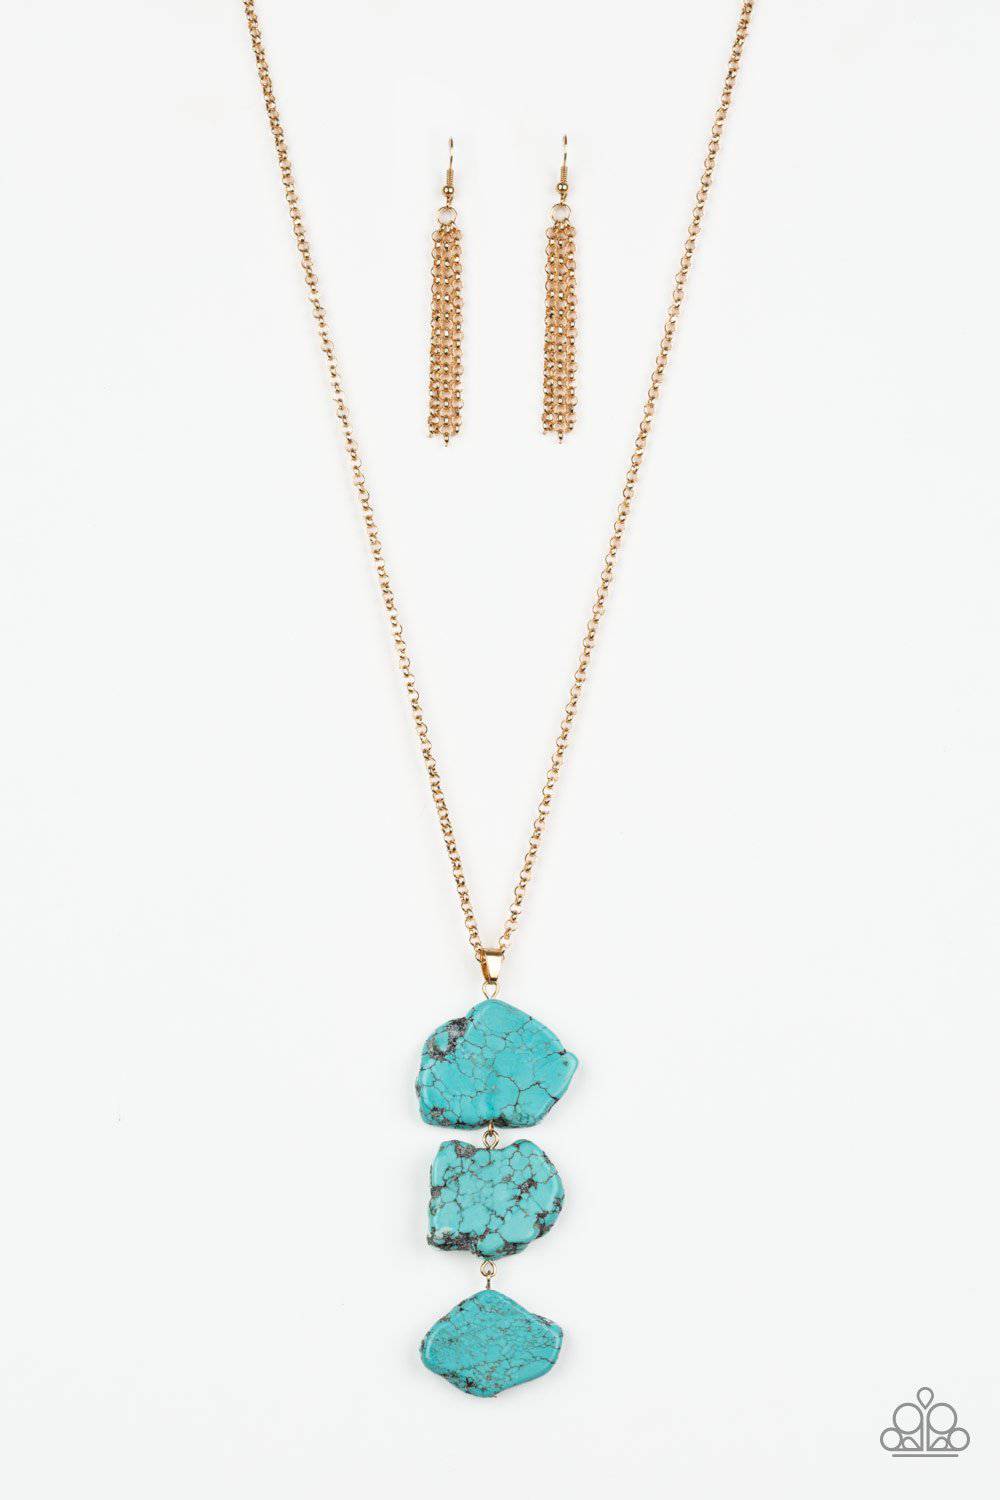 On The ROAM Again - Gold & Turquoise Necklace - Paparazzi Accessories - GlaMarous Titi Jewels